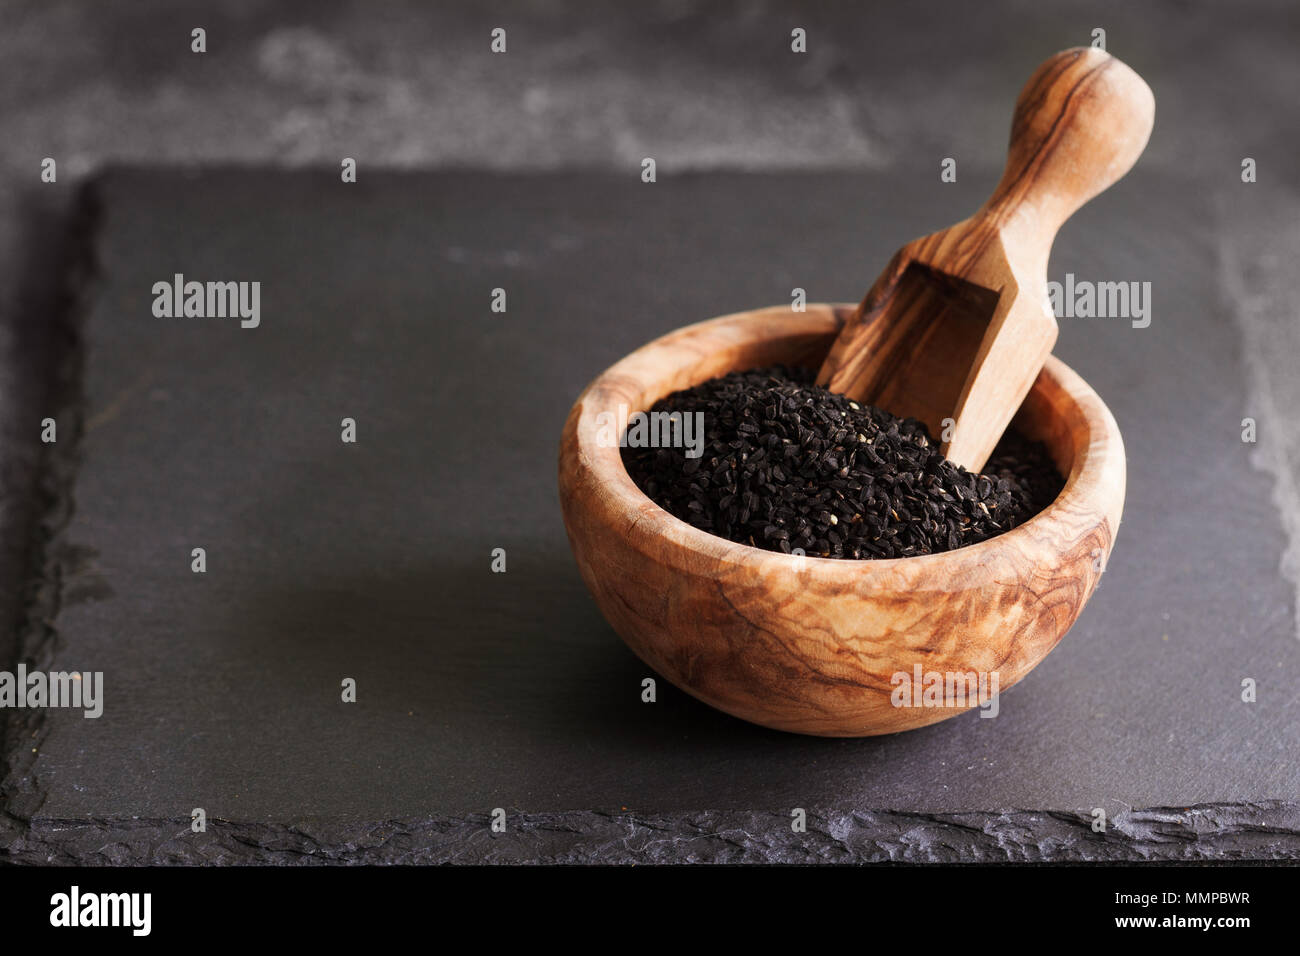 Black cumin or nigella sativa or kalonji seeds in bowl with spoon on black slate background, selective focus Stock Photo